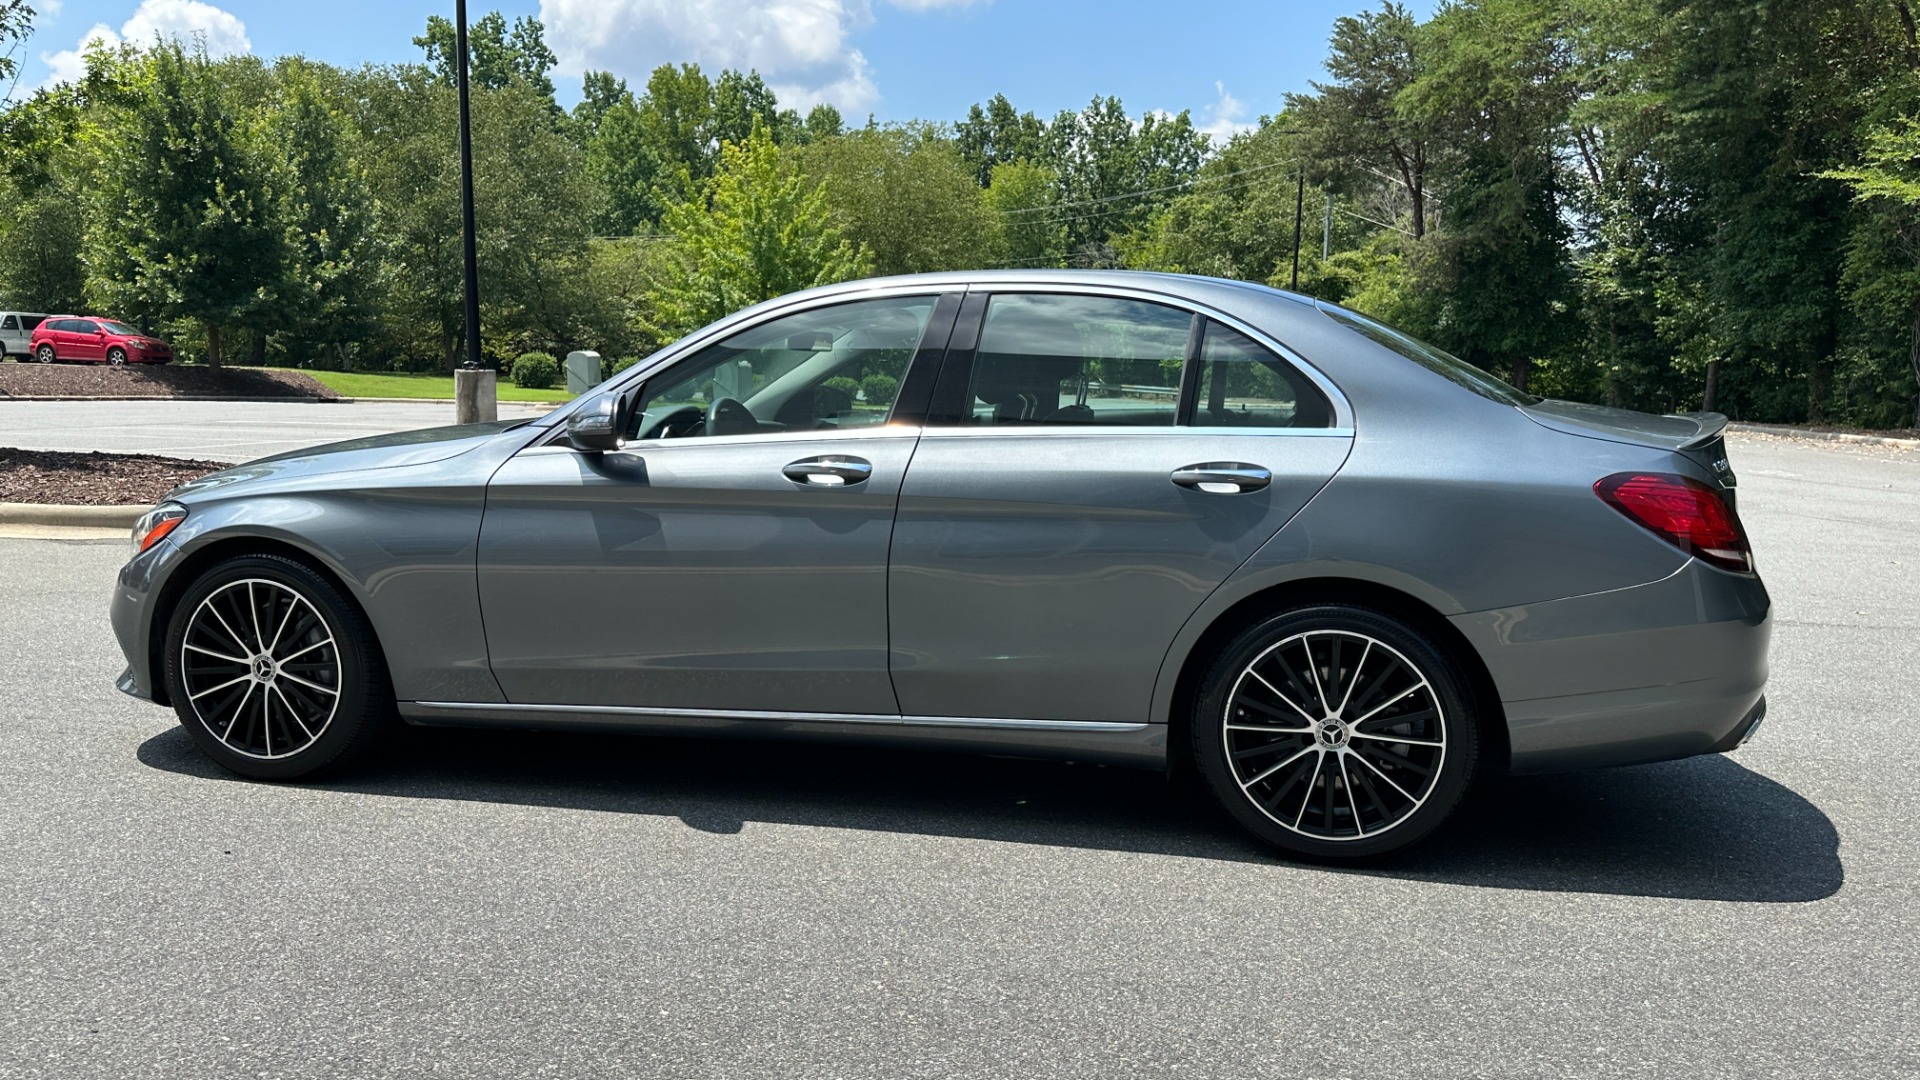 Used 2019 Mercedes-Benz C-Class C300 / PREMIUM / AMBIENT LIGHTS / BLIND SPOT / 10.25IN DISPLAY for sale $27,595 at Formula Imports in Charlotte NC 28227 3